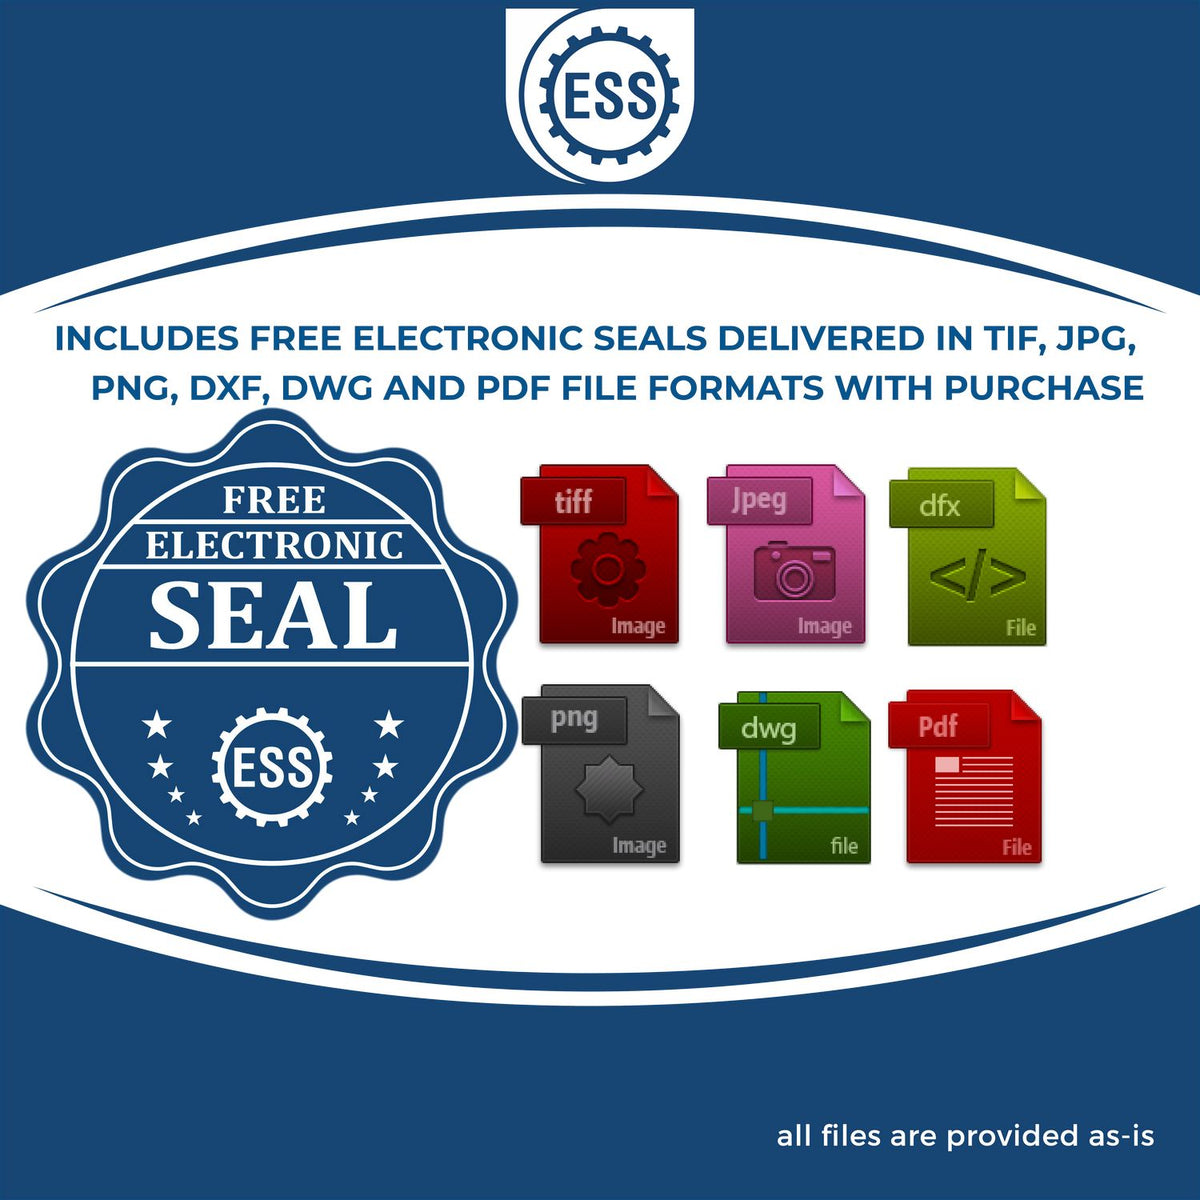 An infographic for the free electronic seal for the Self-Inking Louisiana Geologist Stamp illustrating the different file type icons such as DXF, DWG, TIF, JPG and PNG.